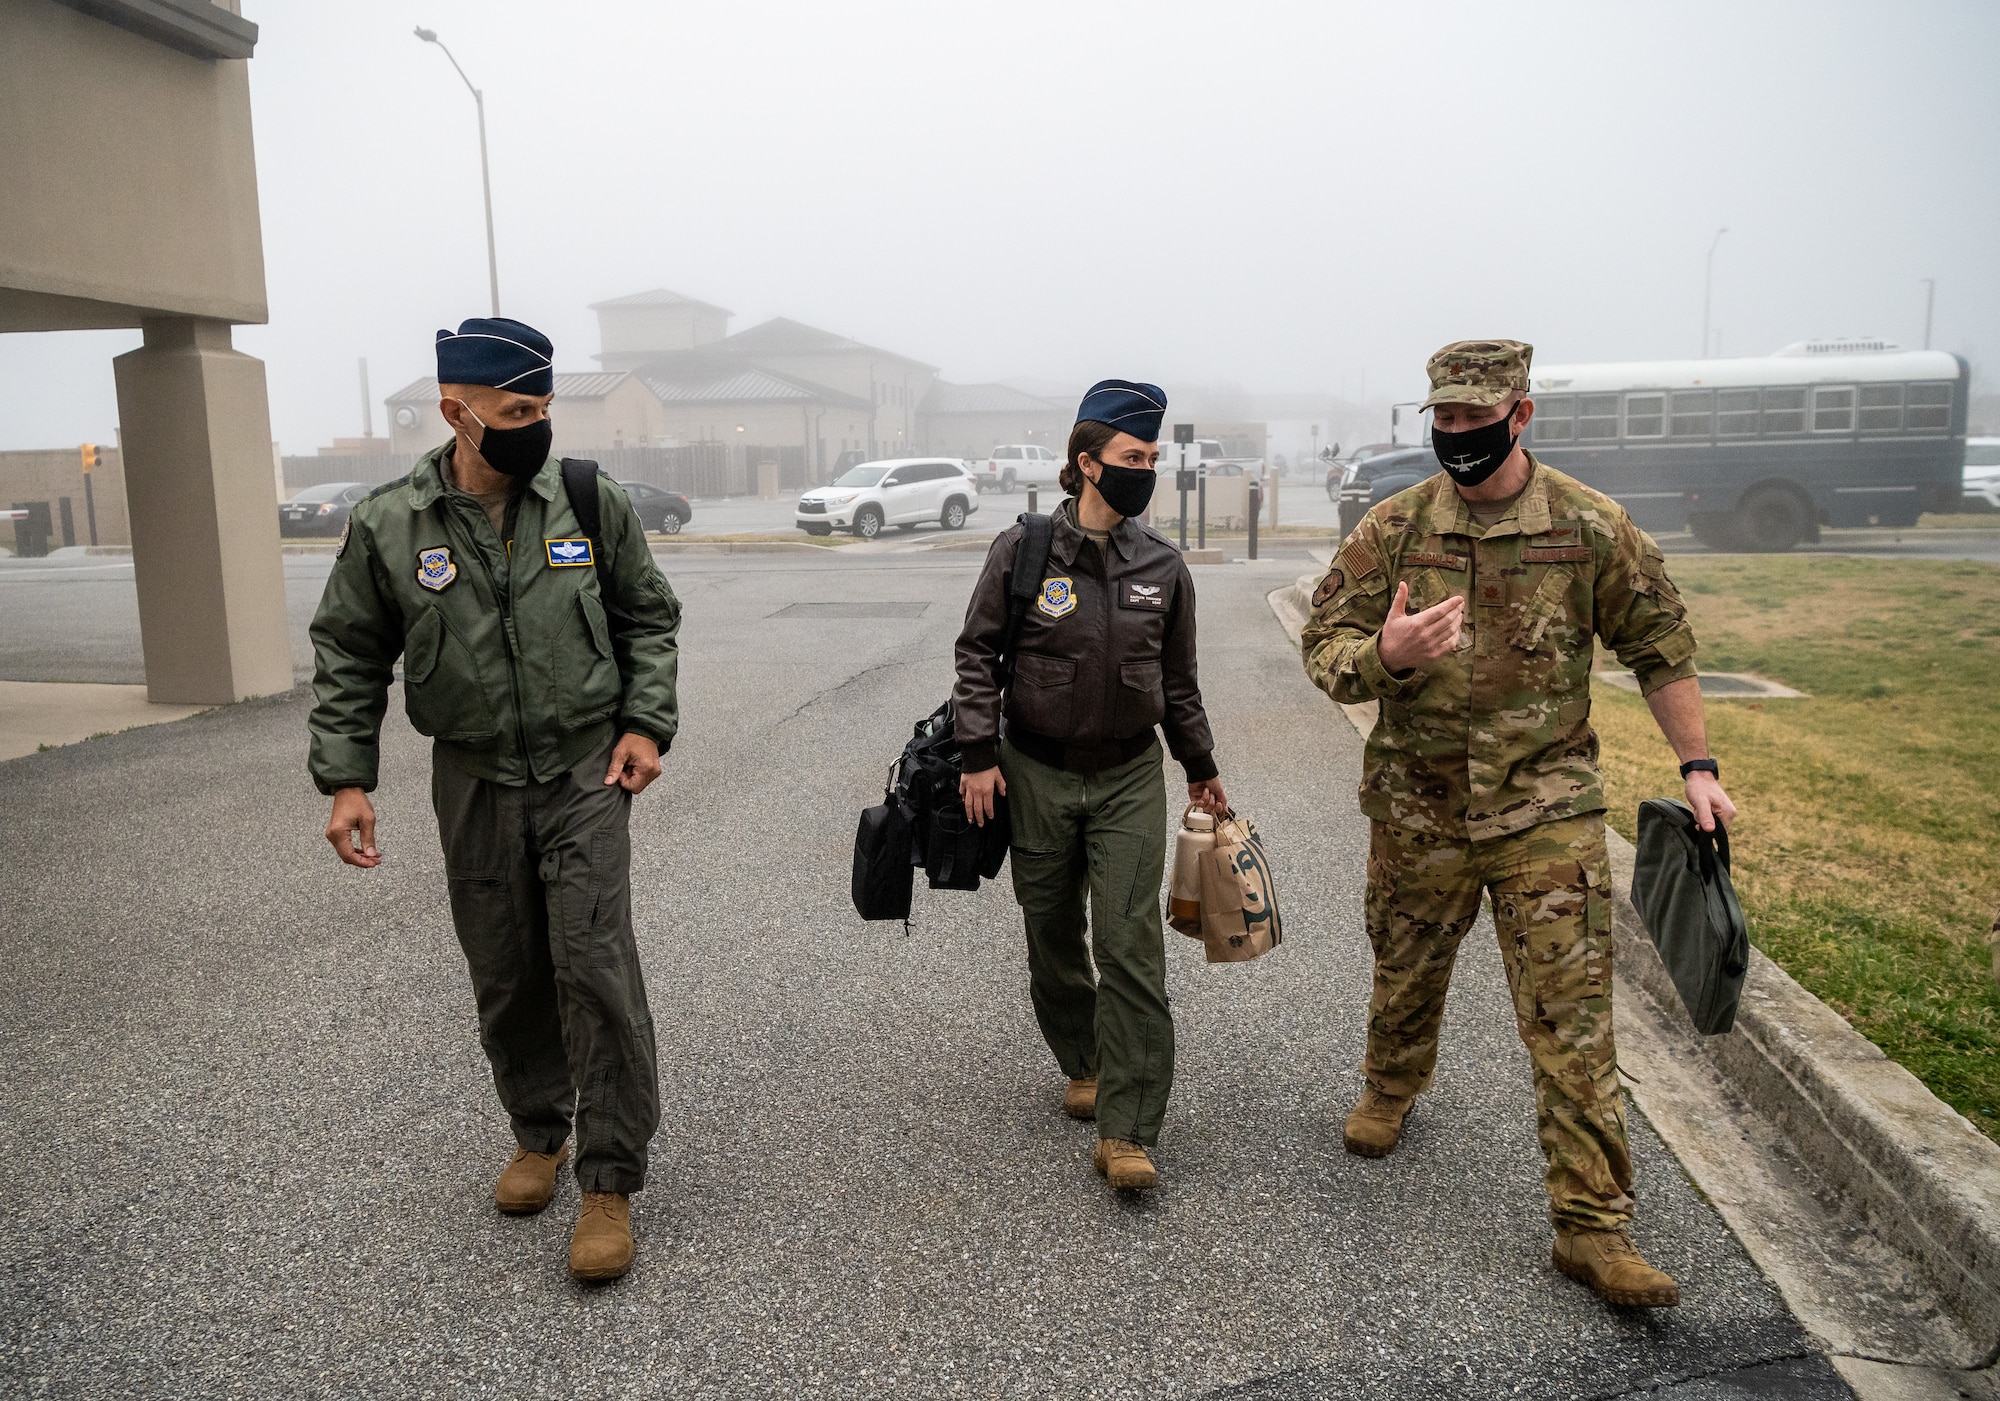 From left, U.S. Air Force Airmen Lt. Gen. Brian Robinson, Air Mobility Command deputy commander, Capt. Kaitlyn Tinkham, AMC executive officer to the deputy commander, and Maj. Steven Beachler, 3rd Airlift Squadron pilot, walk to the base operations building prior to a flight at Dover Air Force Base, Delaware, March 23, 2021. Robinson visited Dover AFB to engage with base leaders and fulfill training requirements on the C-17 Globemaster III. (U.S. Air Force photo by Senior Airman Christopher Quail)